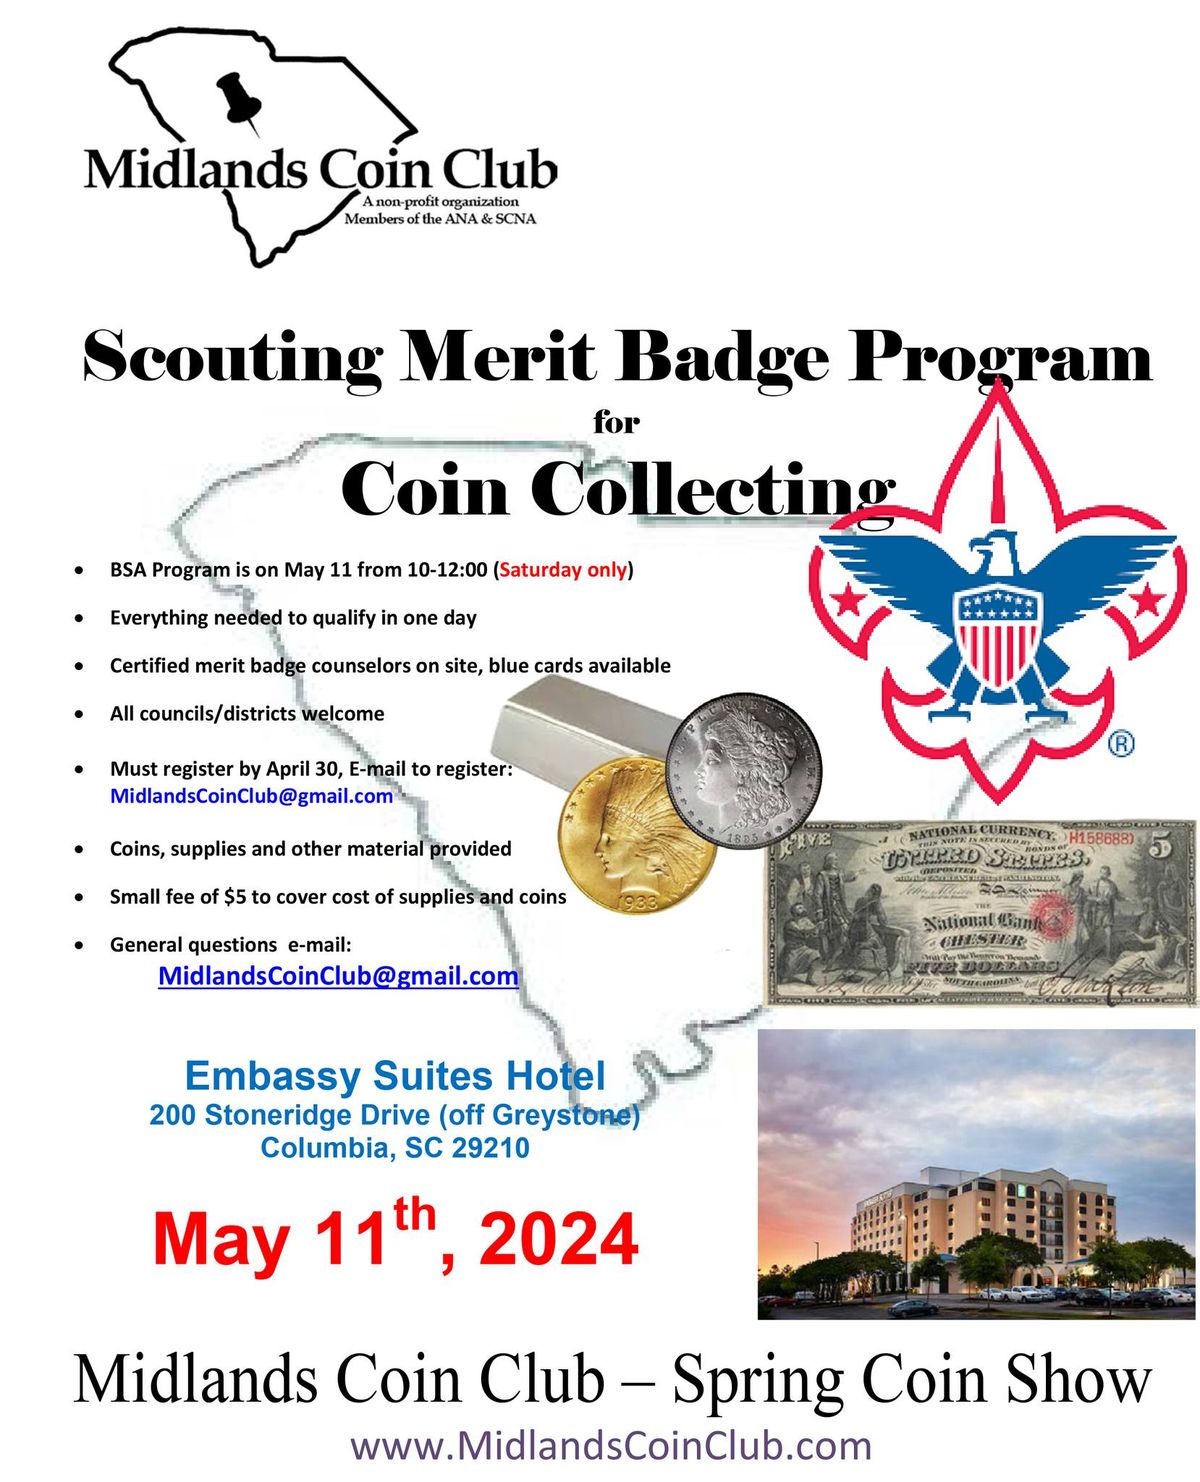 BSA (Boy Scouts) Coin Collecting Merit Badge Clinic